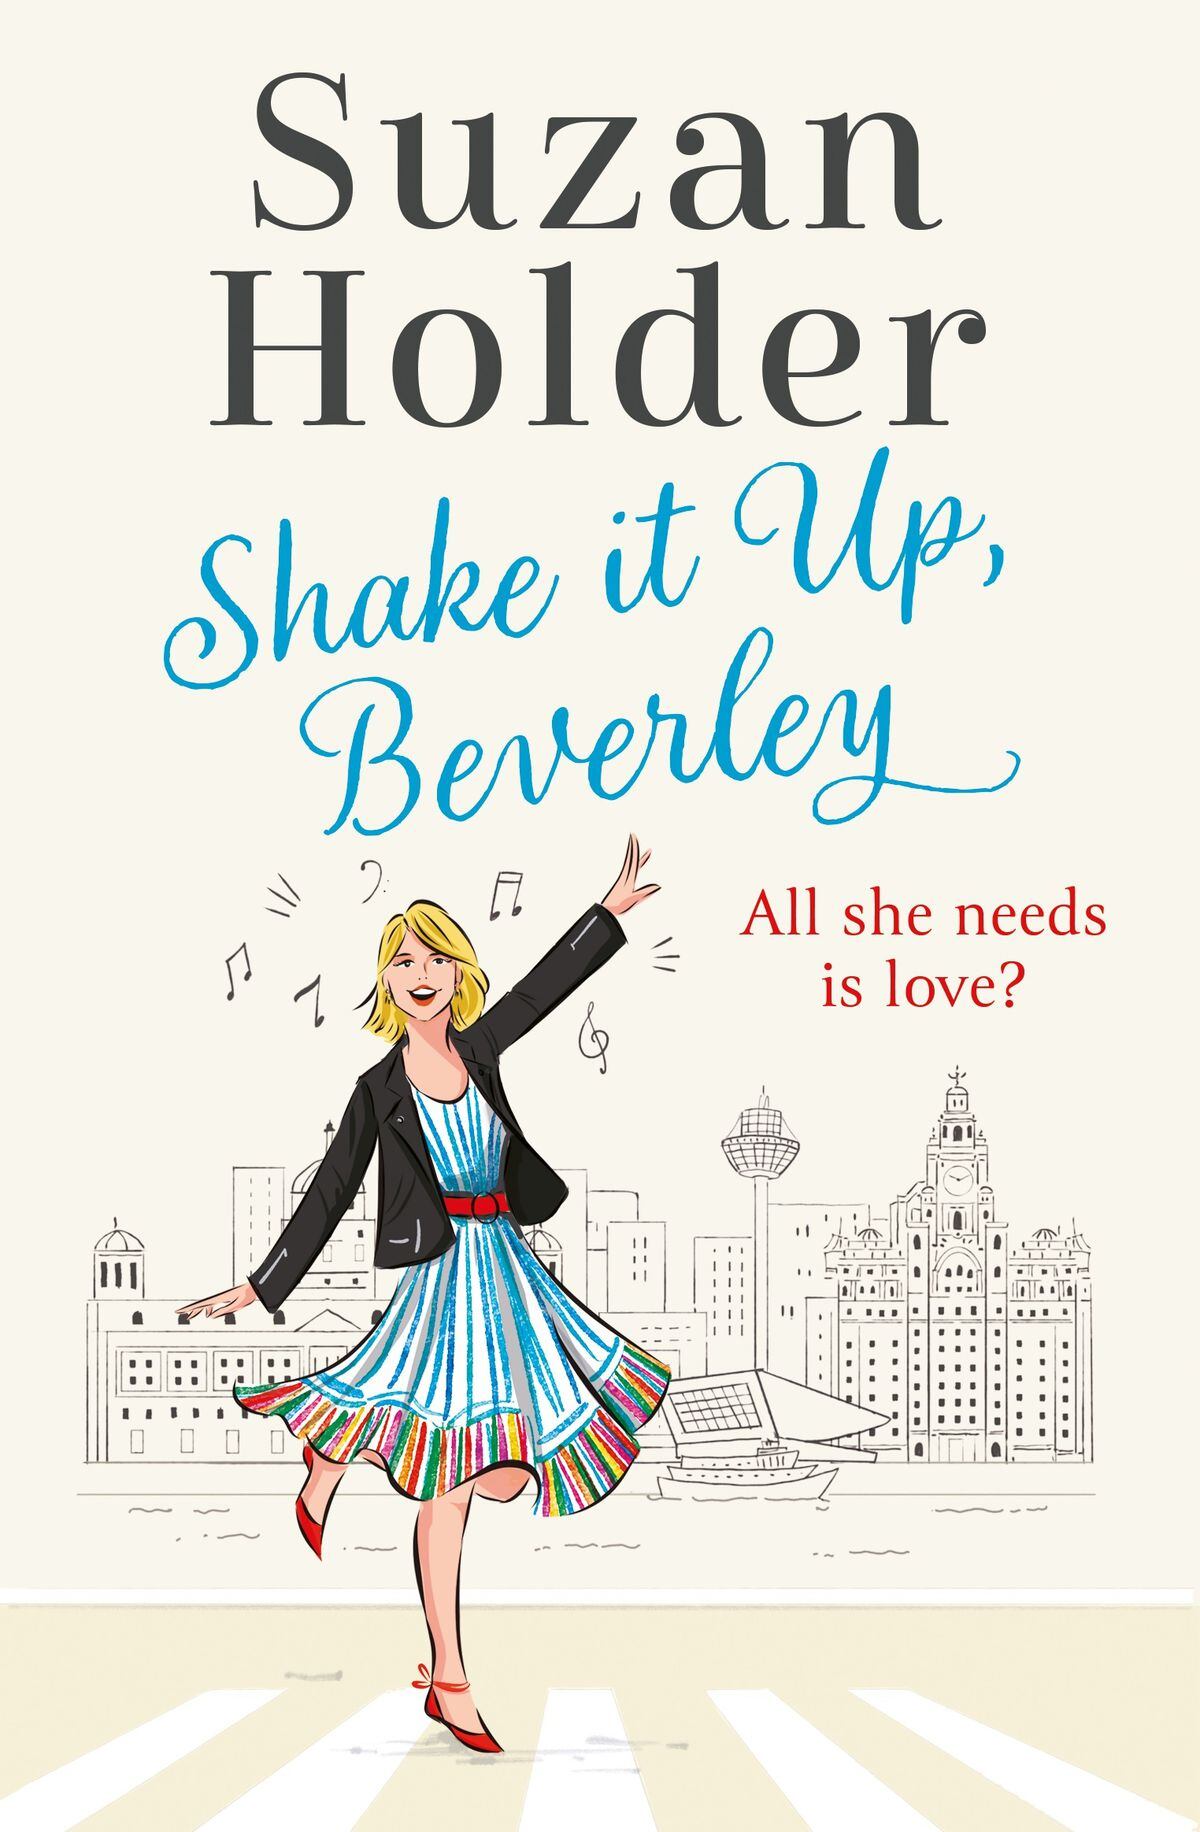 The cover of Suzan Holder's new book